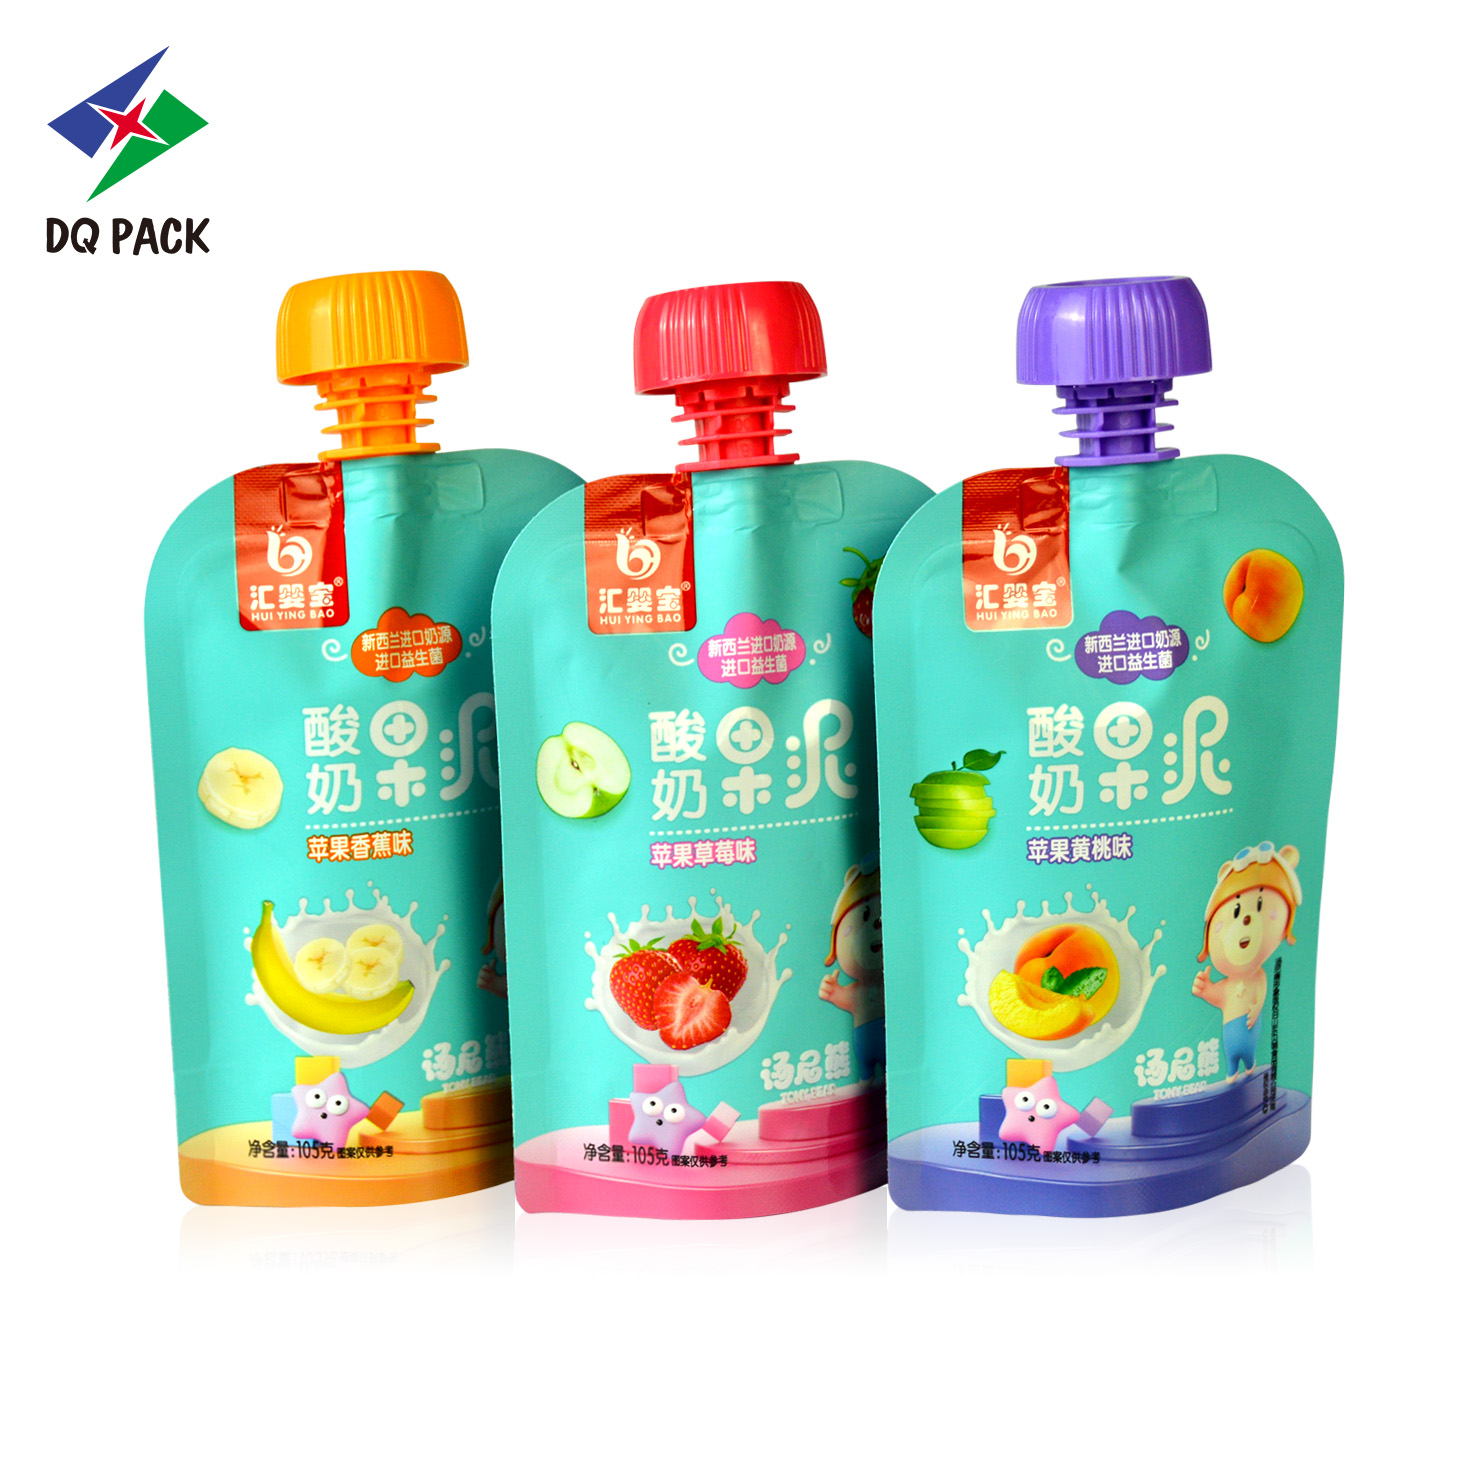 DQ PACK Colorful Design 105g Fruit Puree Stand Up Spout Pouch Food Grade Plastic Packaging Bag